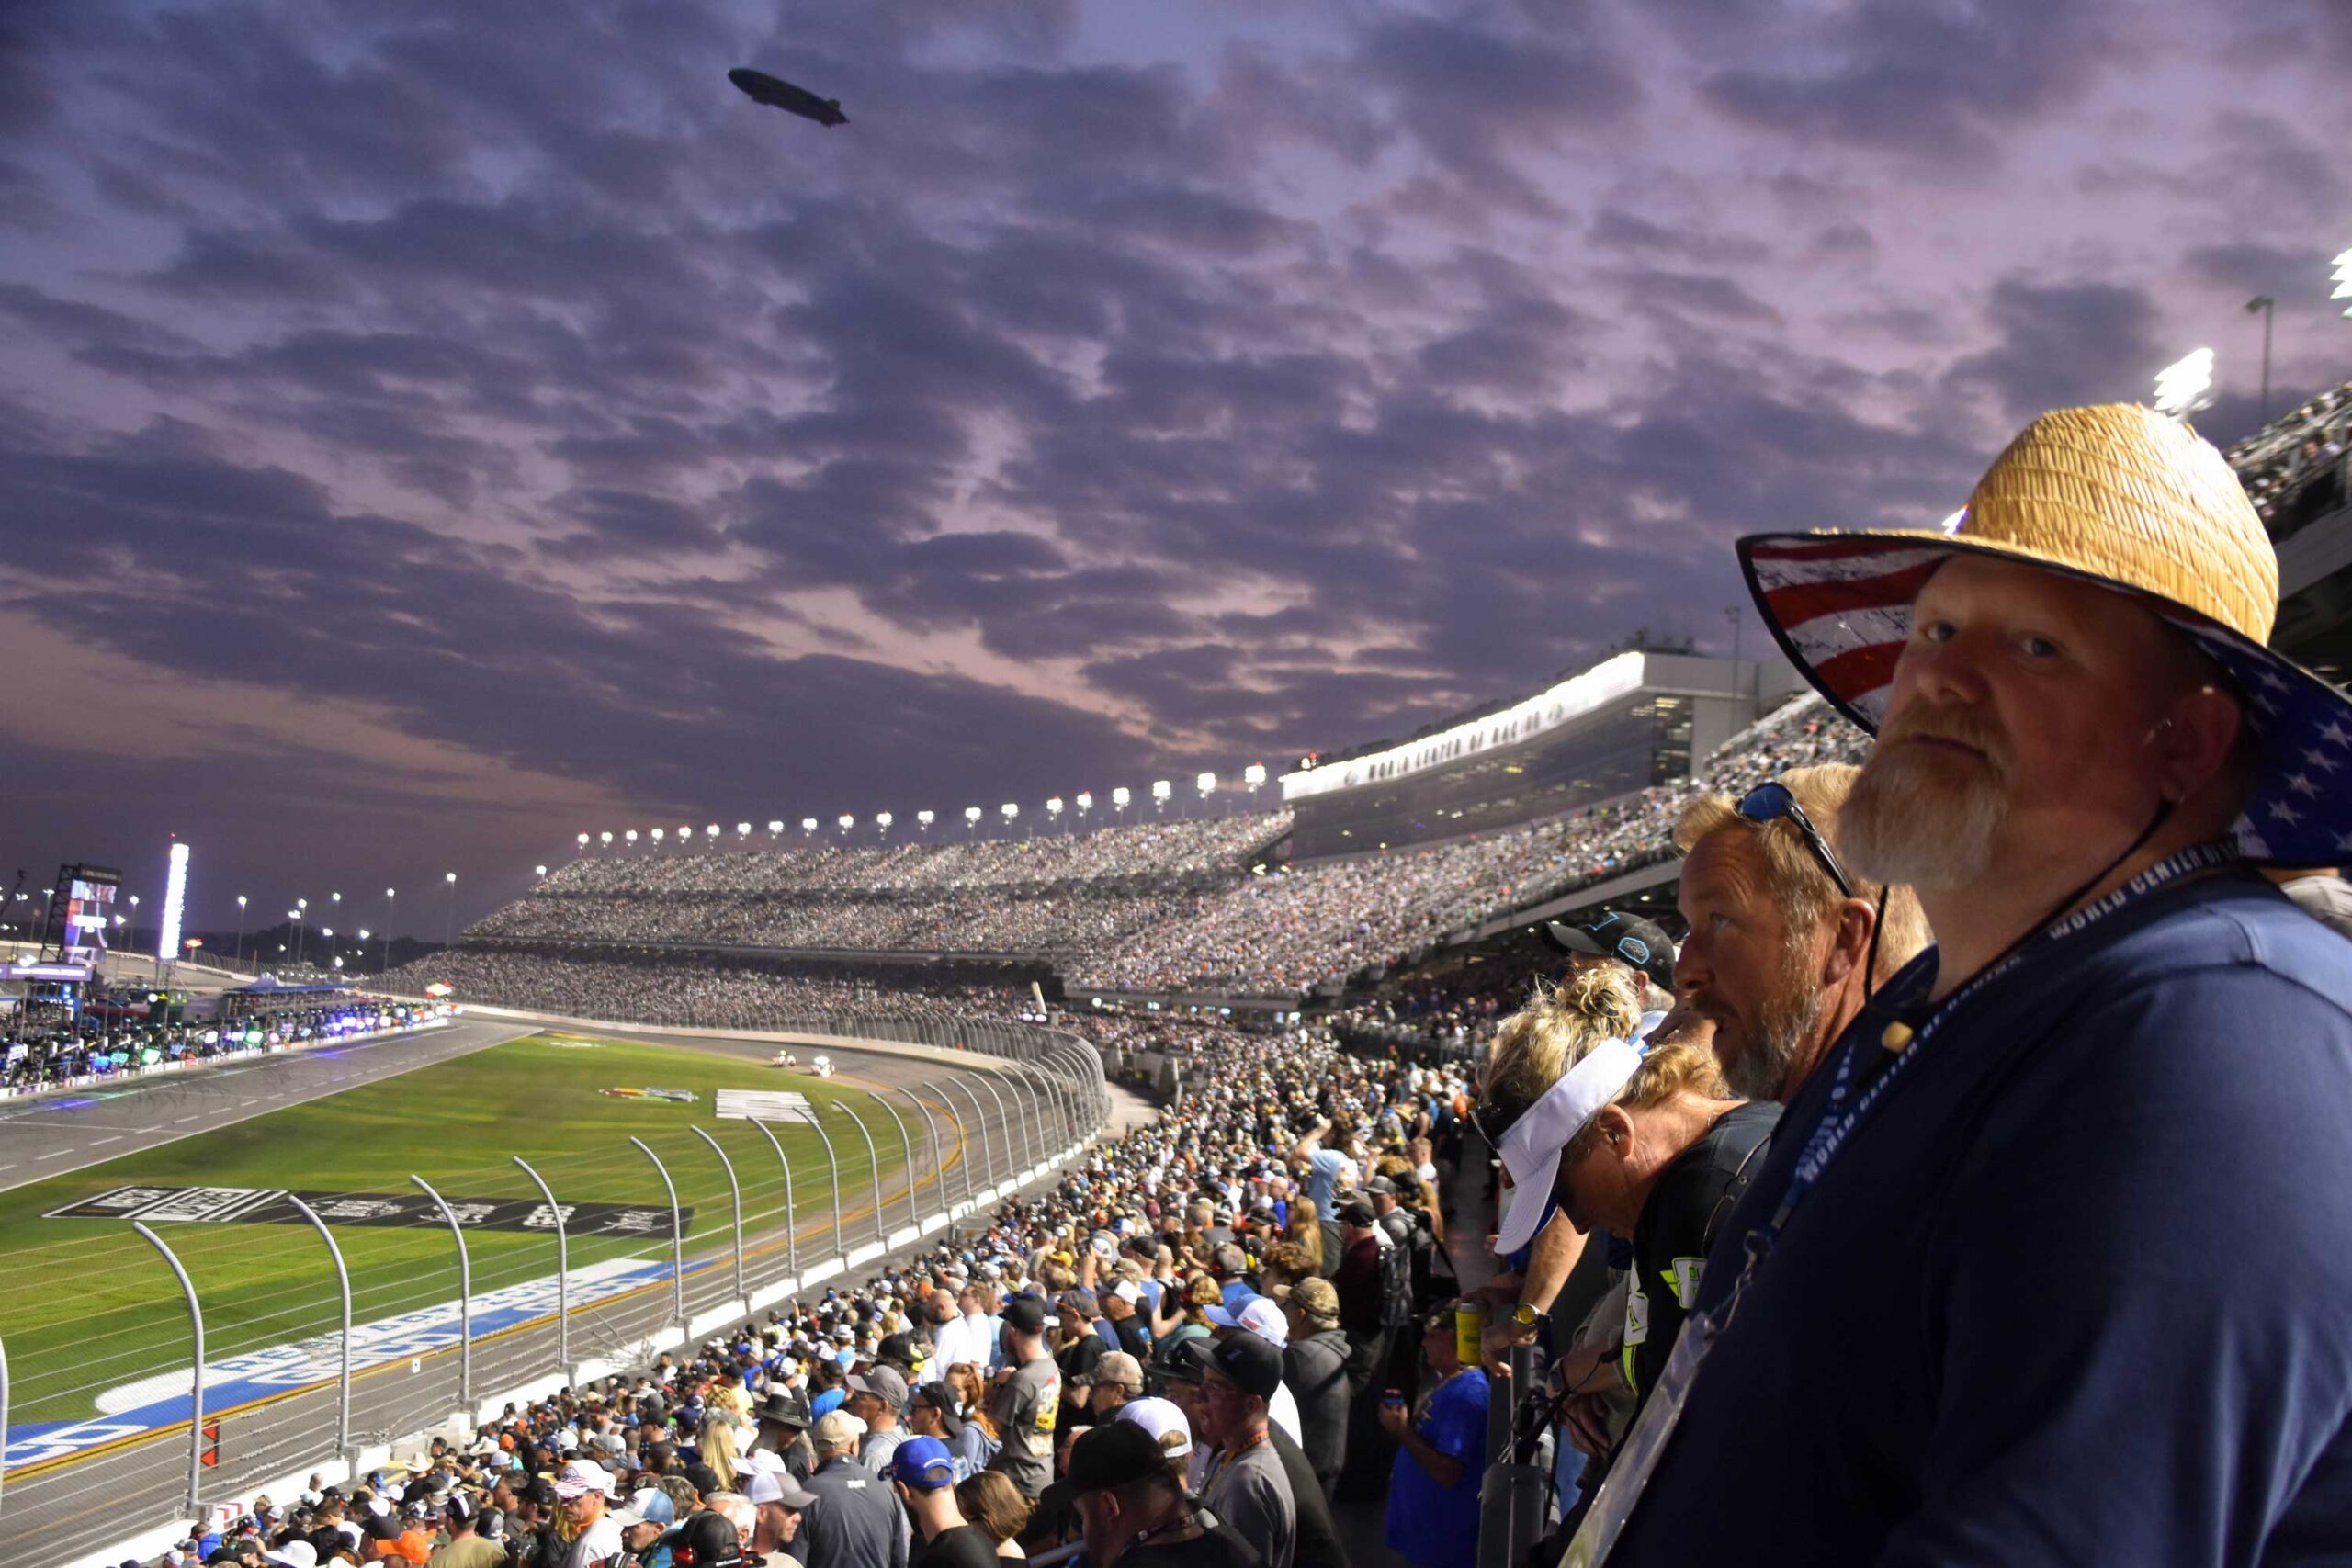 Crowd and stands of the Daytona 500